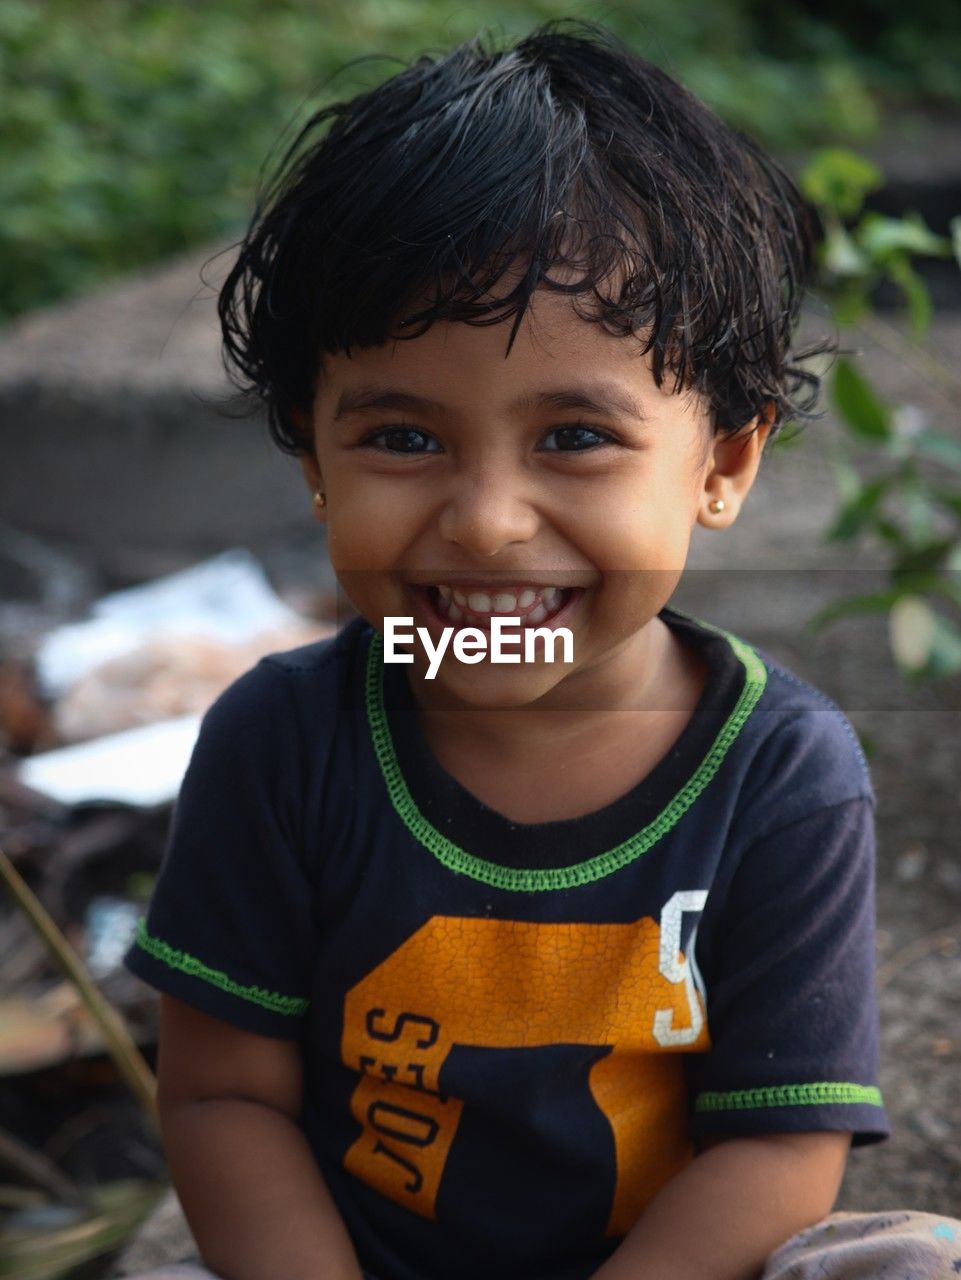 child, childhood, portrait, one person, smiling, men, looking at camera, happiness, person, emotion, toddler, teenager, cheerful, cute, front view, casual clothing, nature, portrait photography, innocence, skin, teeth, outdoors, human face, smile, lifestyles, day, black hair, female, spring, focus on foreground, clothing, waist up